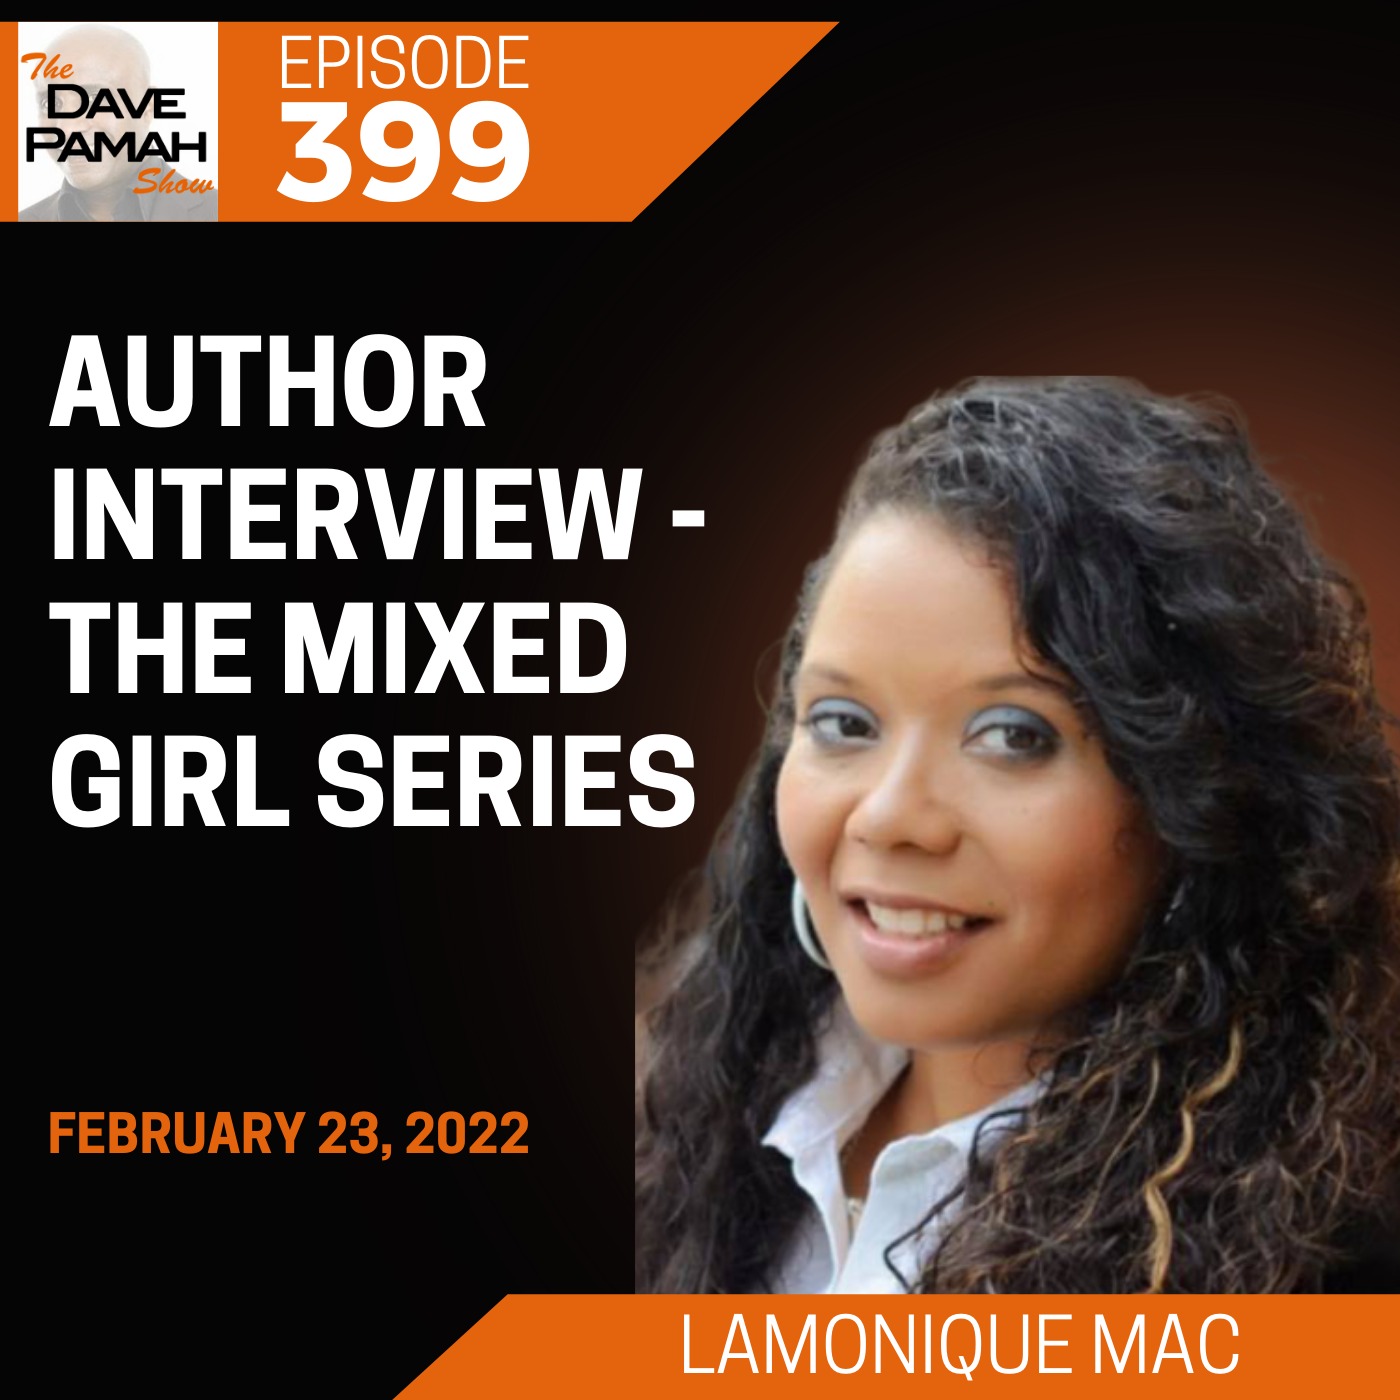 Author Interview - The Mixed Girl Series with Lamonique Mac Image